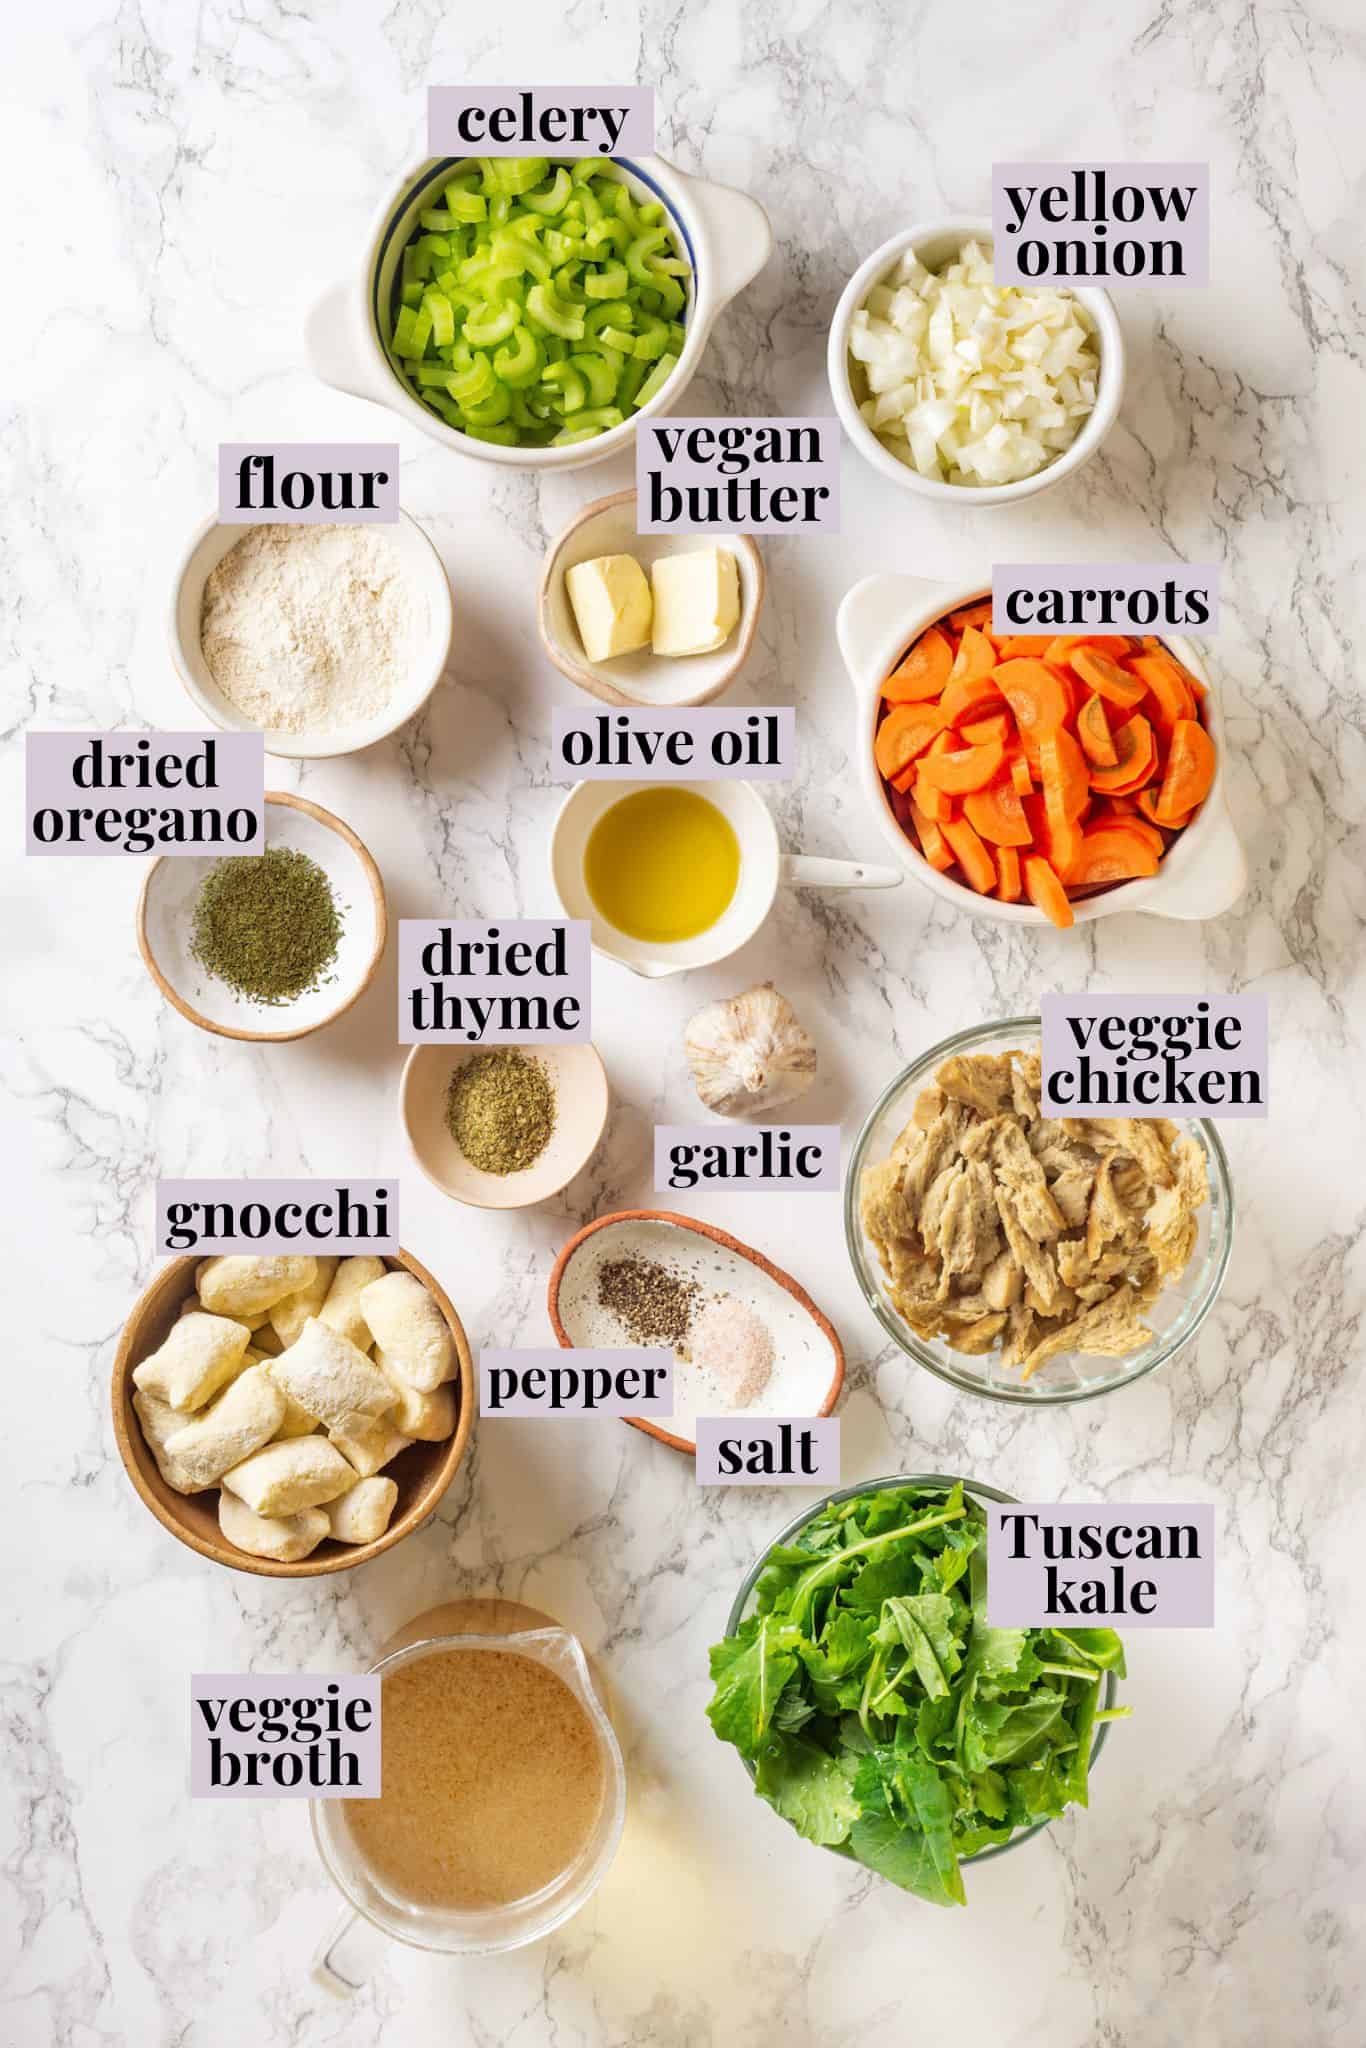 Overhead view of gnocchi soup ingredients with labels